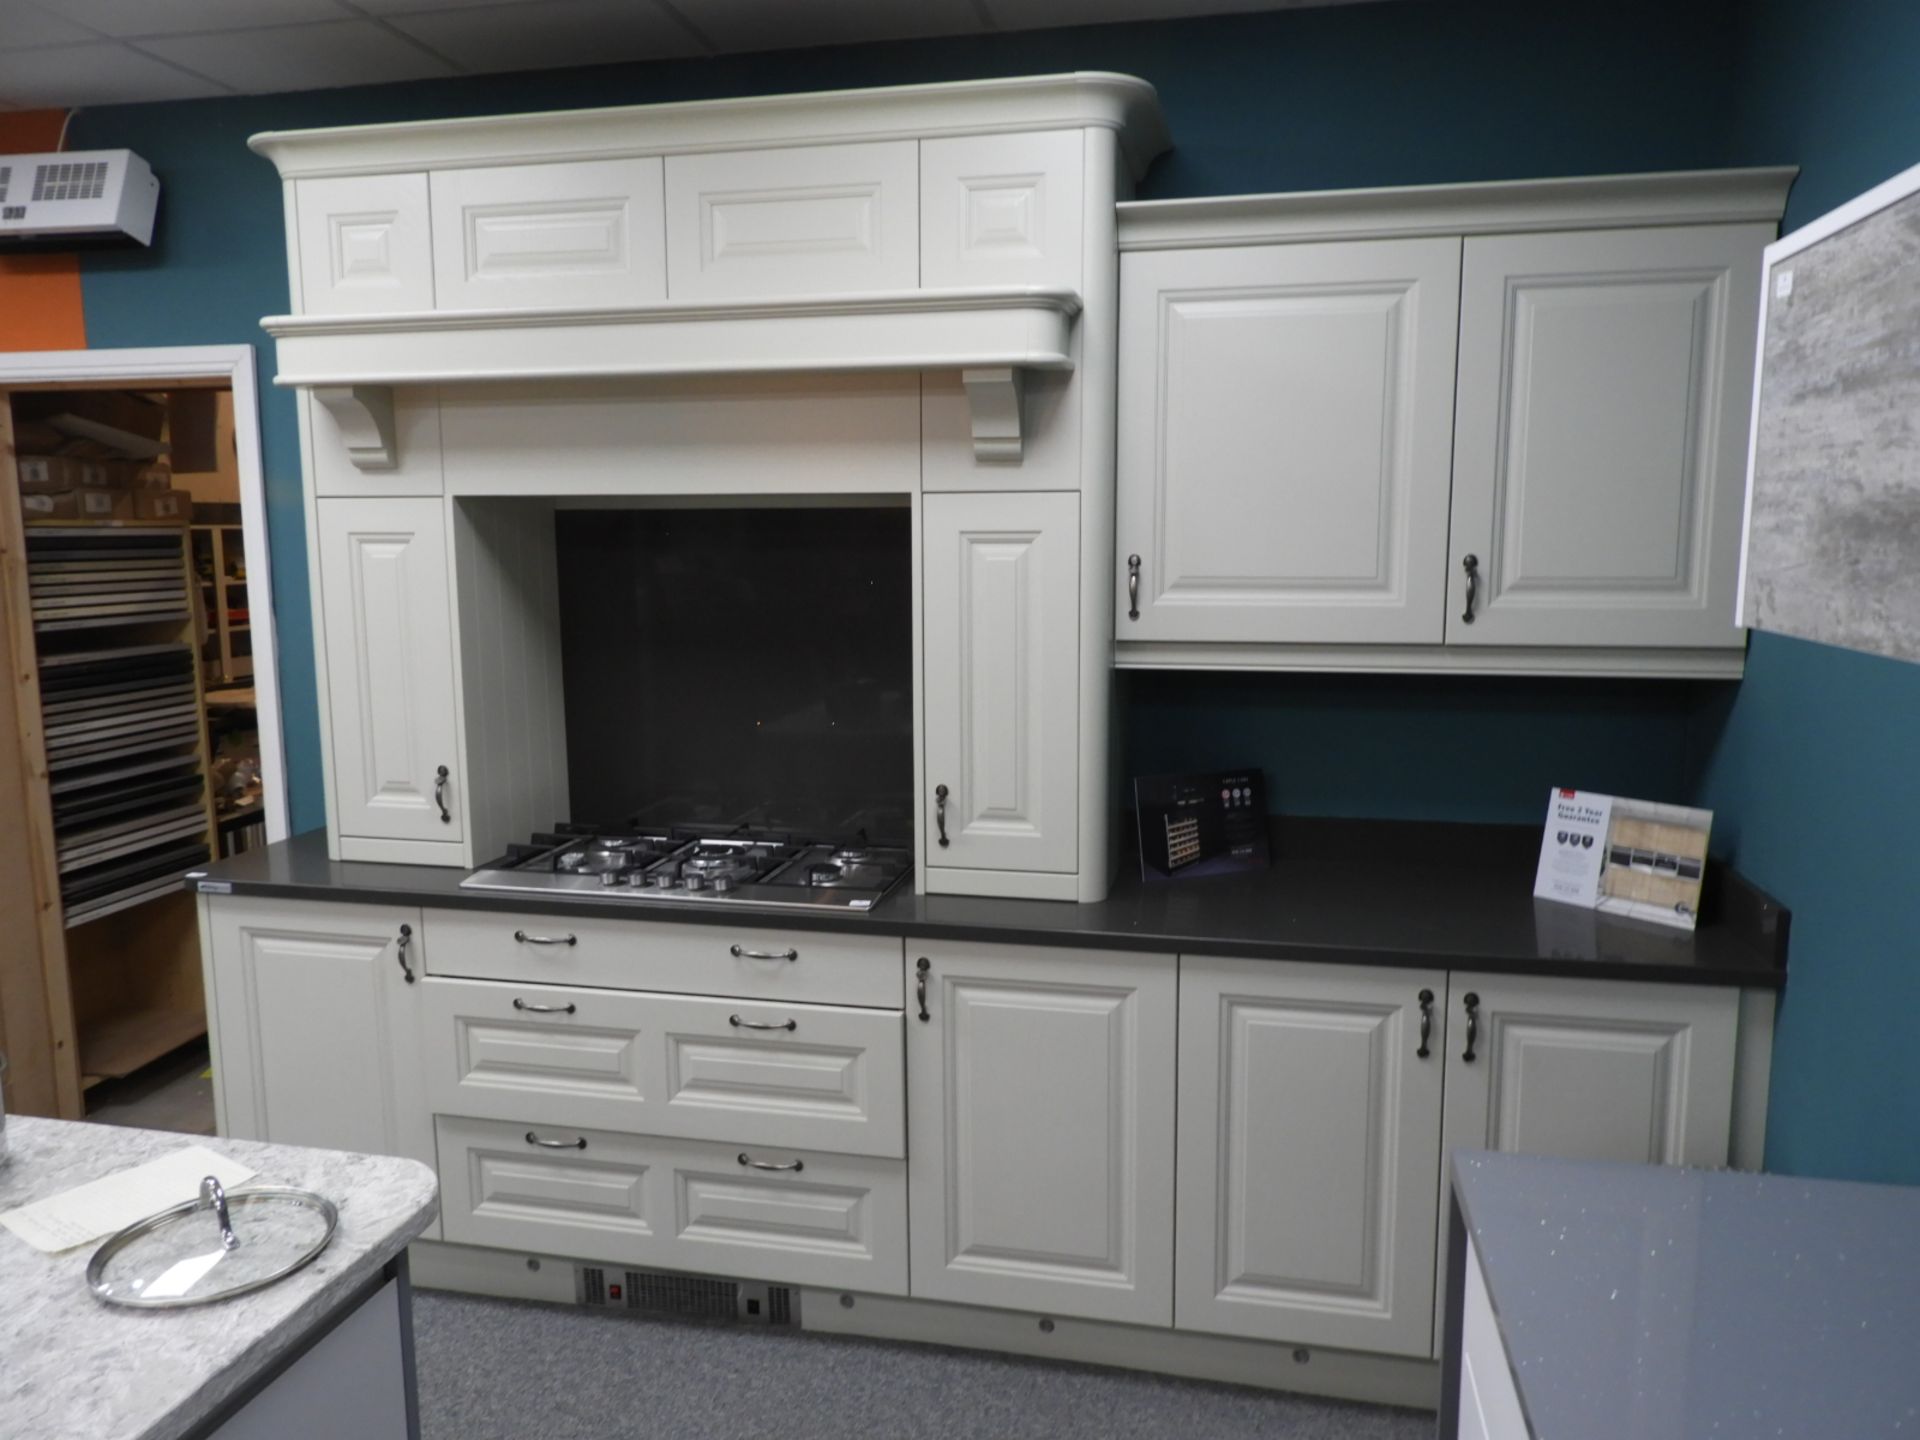 *Jefferson Ivory Display Kitchen with Pewter Latch Handles, and Konigstone Worktop - Image 2 of 3